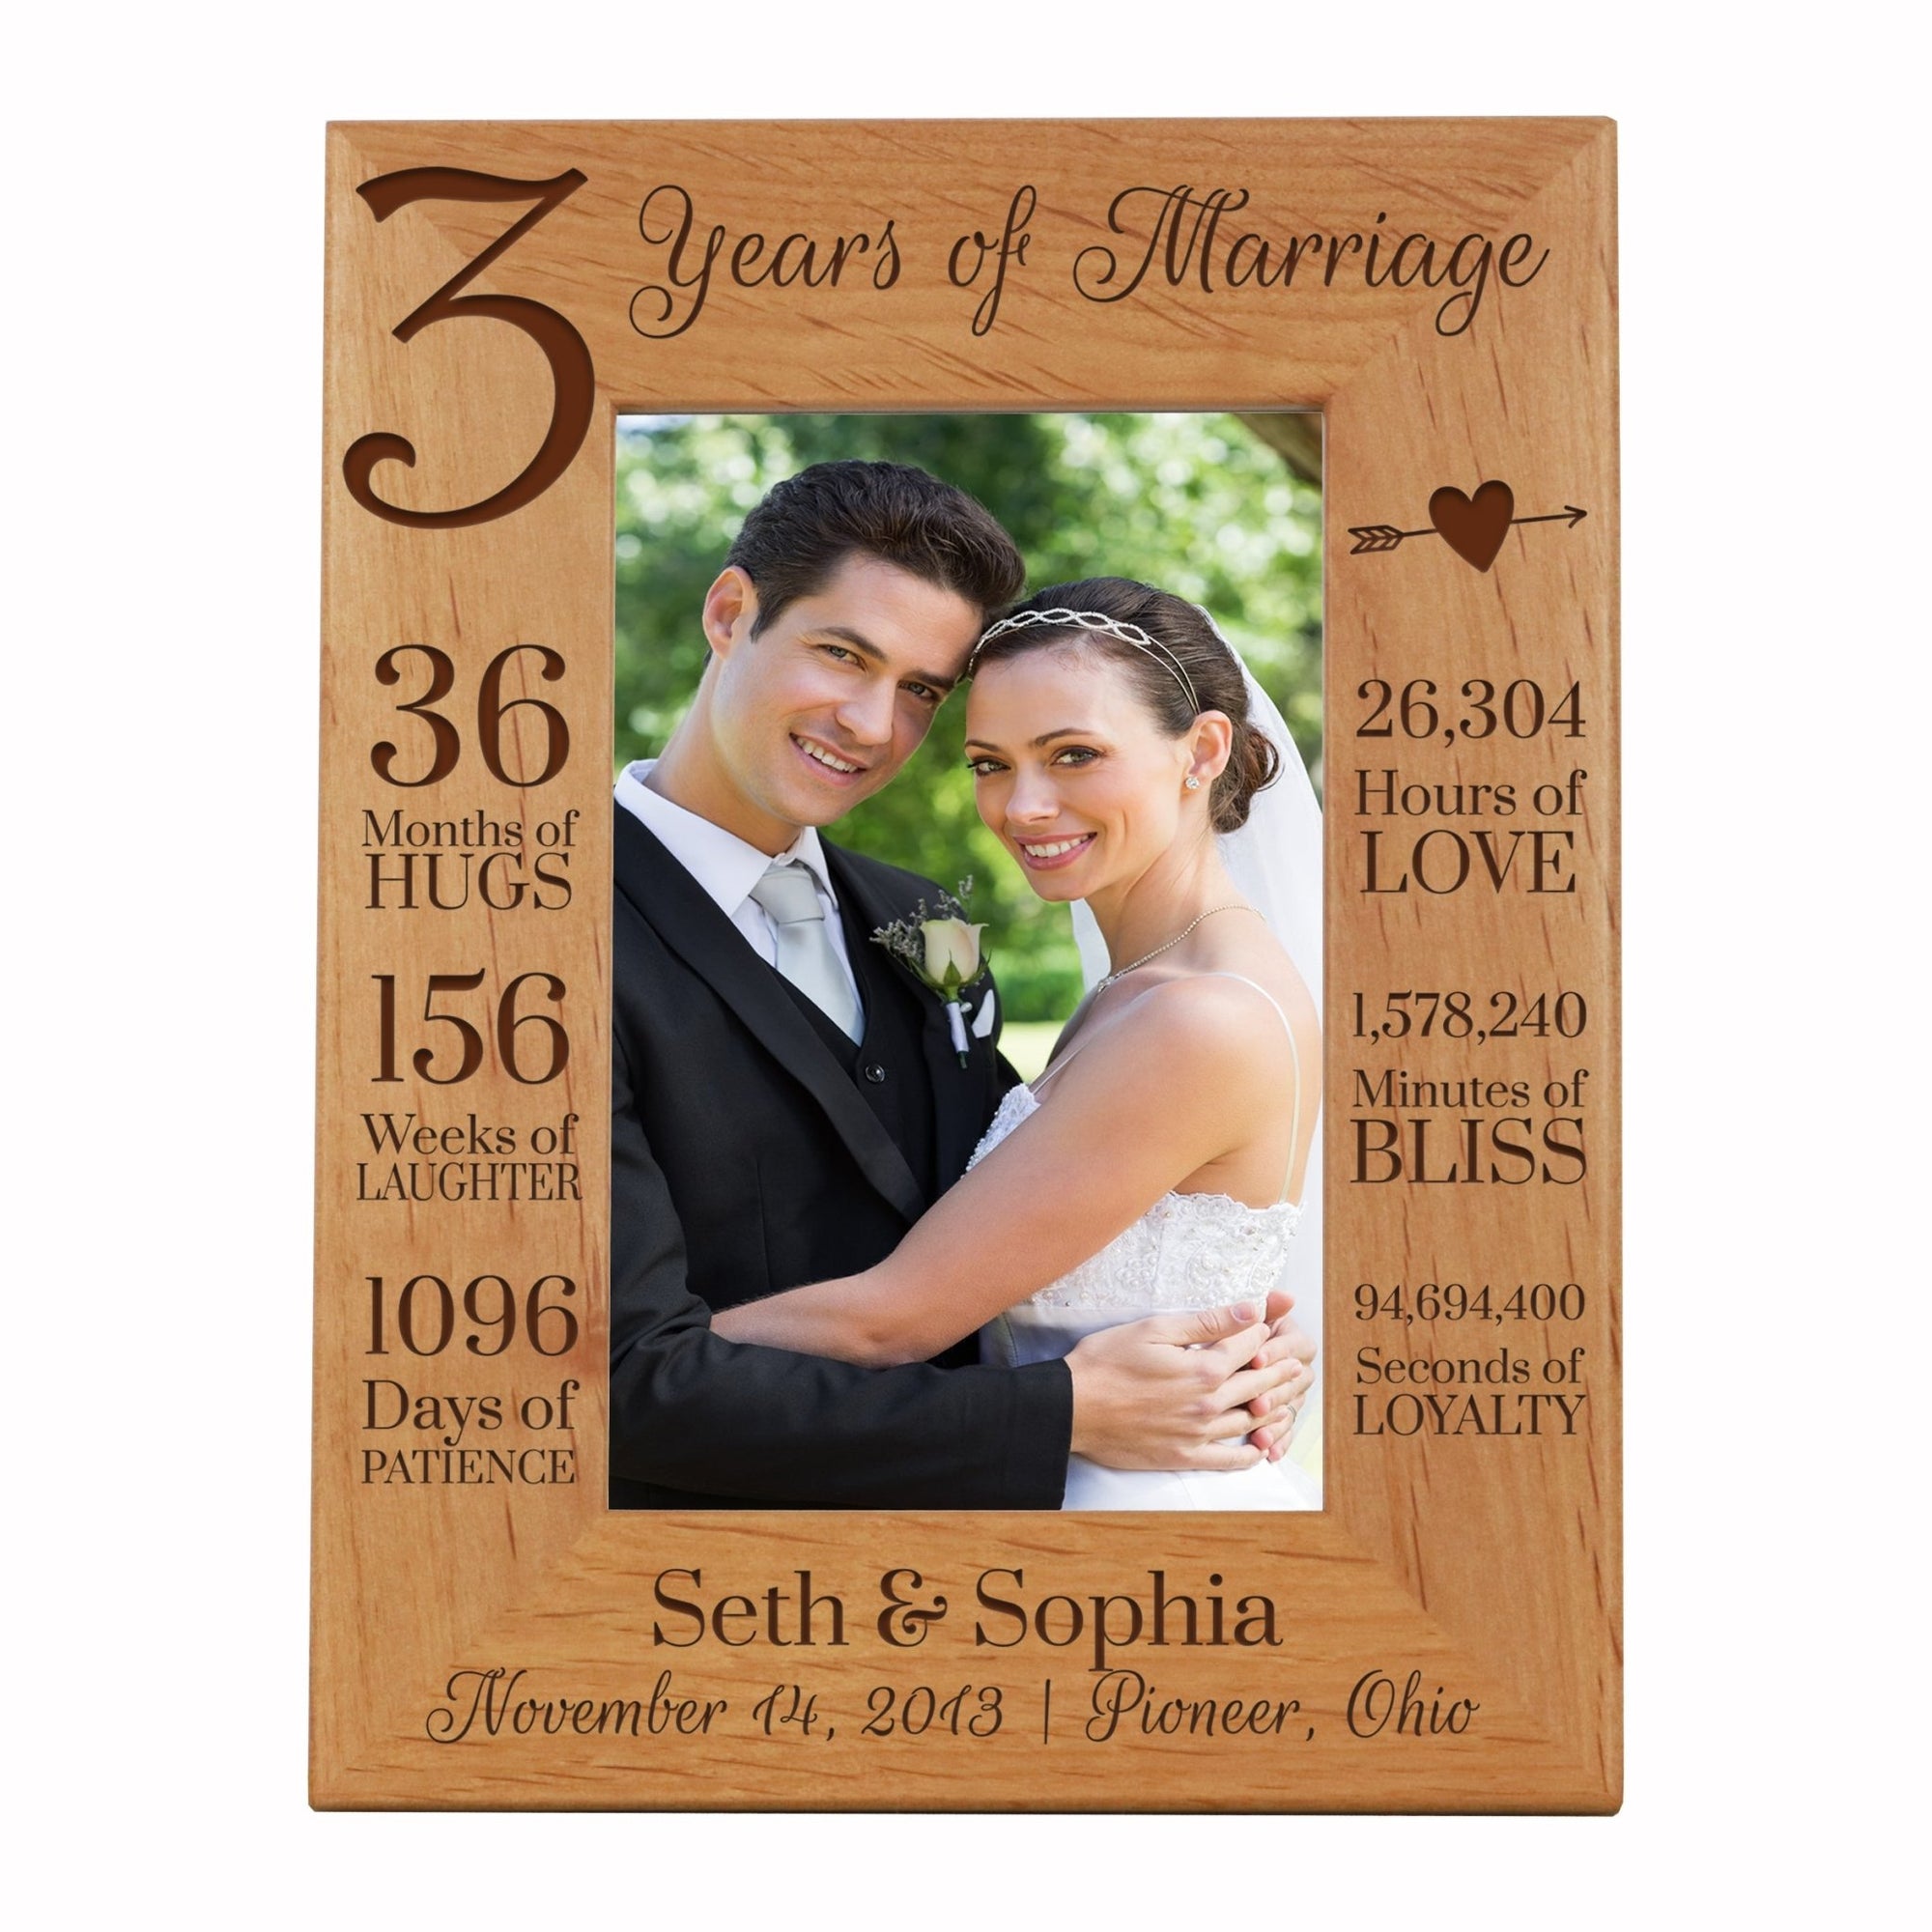 Lifesong Milestones Personalized Engraved 3rd Wedding Anniversary Photo Frame Wall Decor Gift for Couples